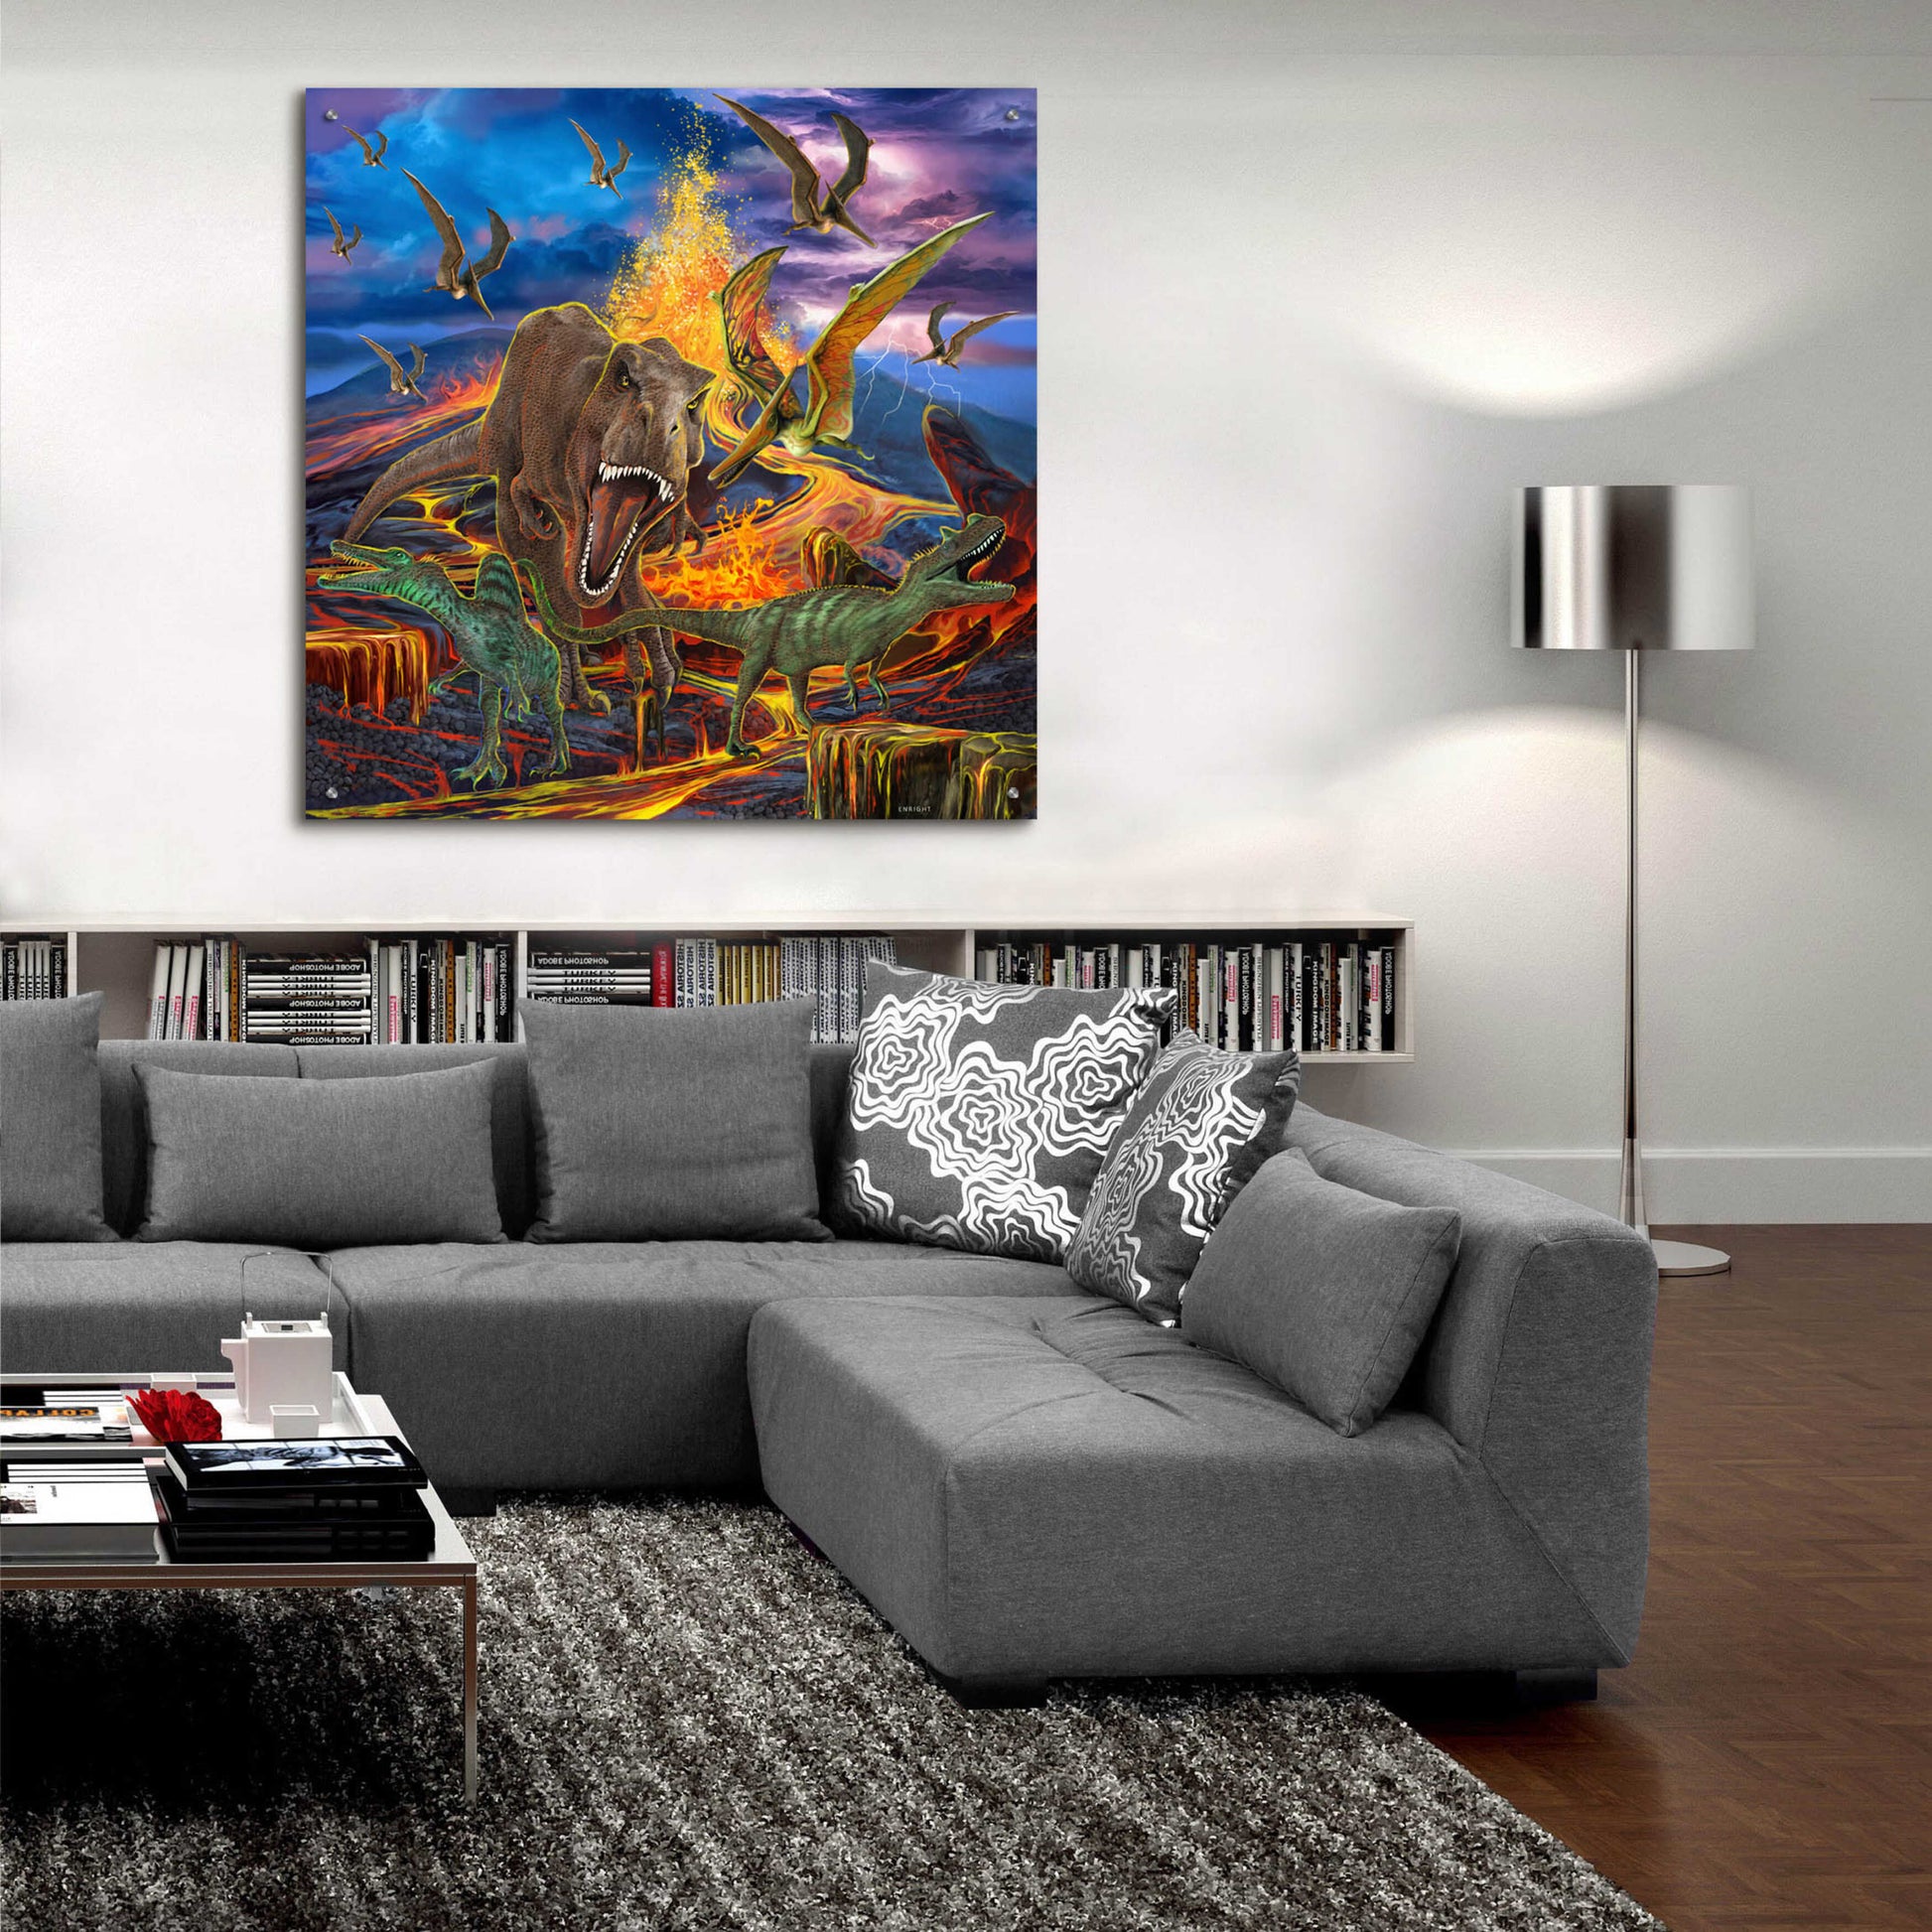 Epic Art 'Kingdom Of The Dinosaurs' by Enright, Acrylic Glass Wall Art,36x36